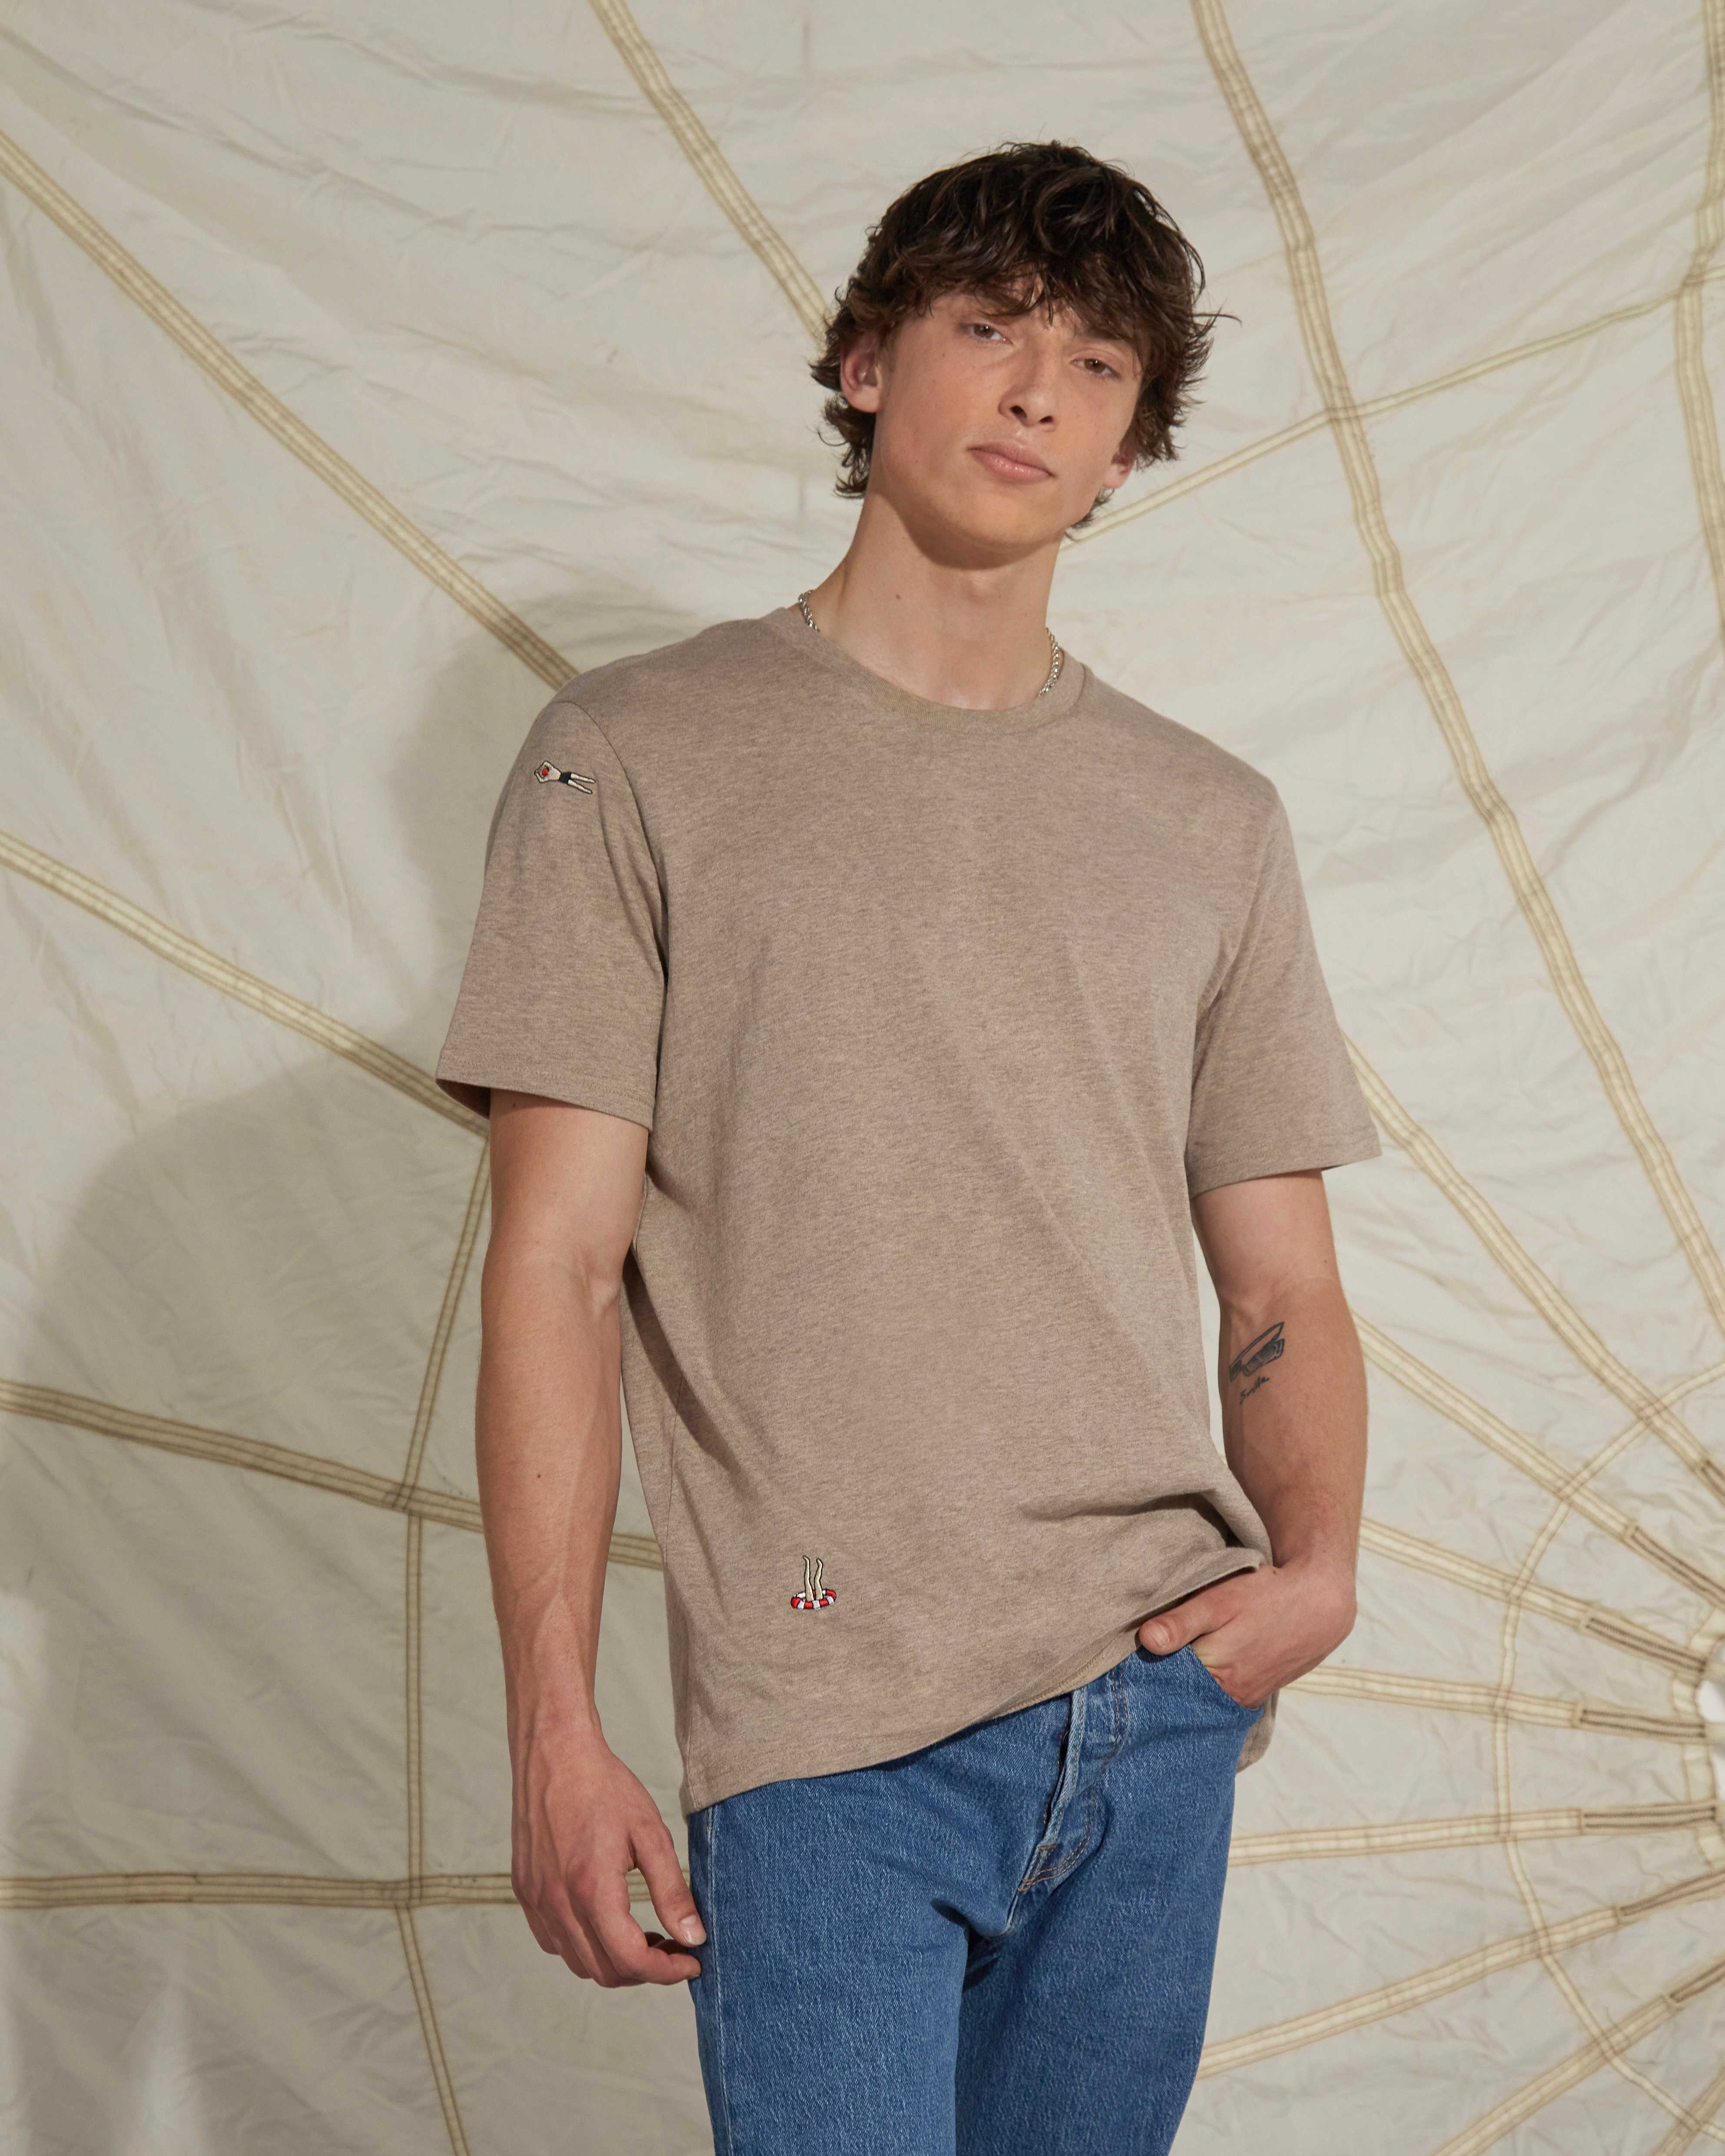 Man wearing a beige tshirt with swimmers embroideries and blue levis jeans posing infront of a kite